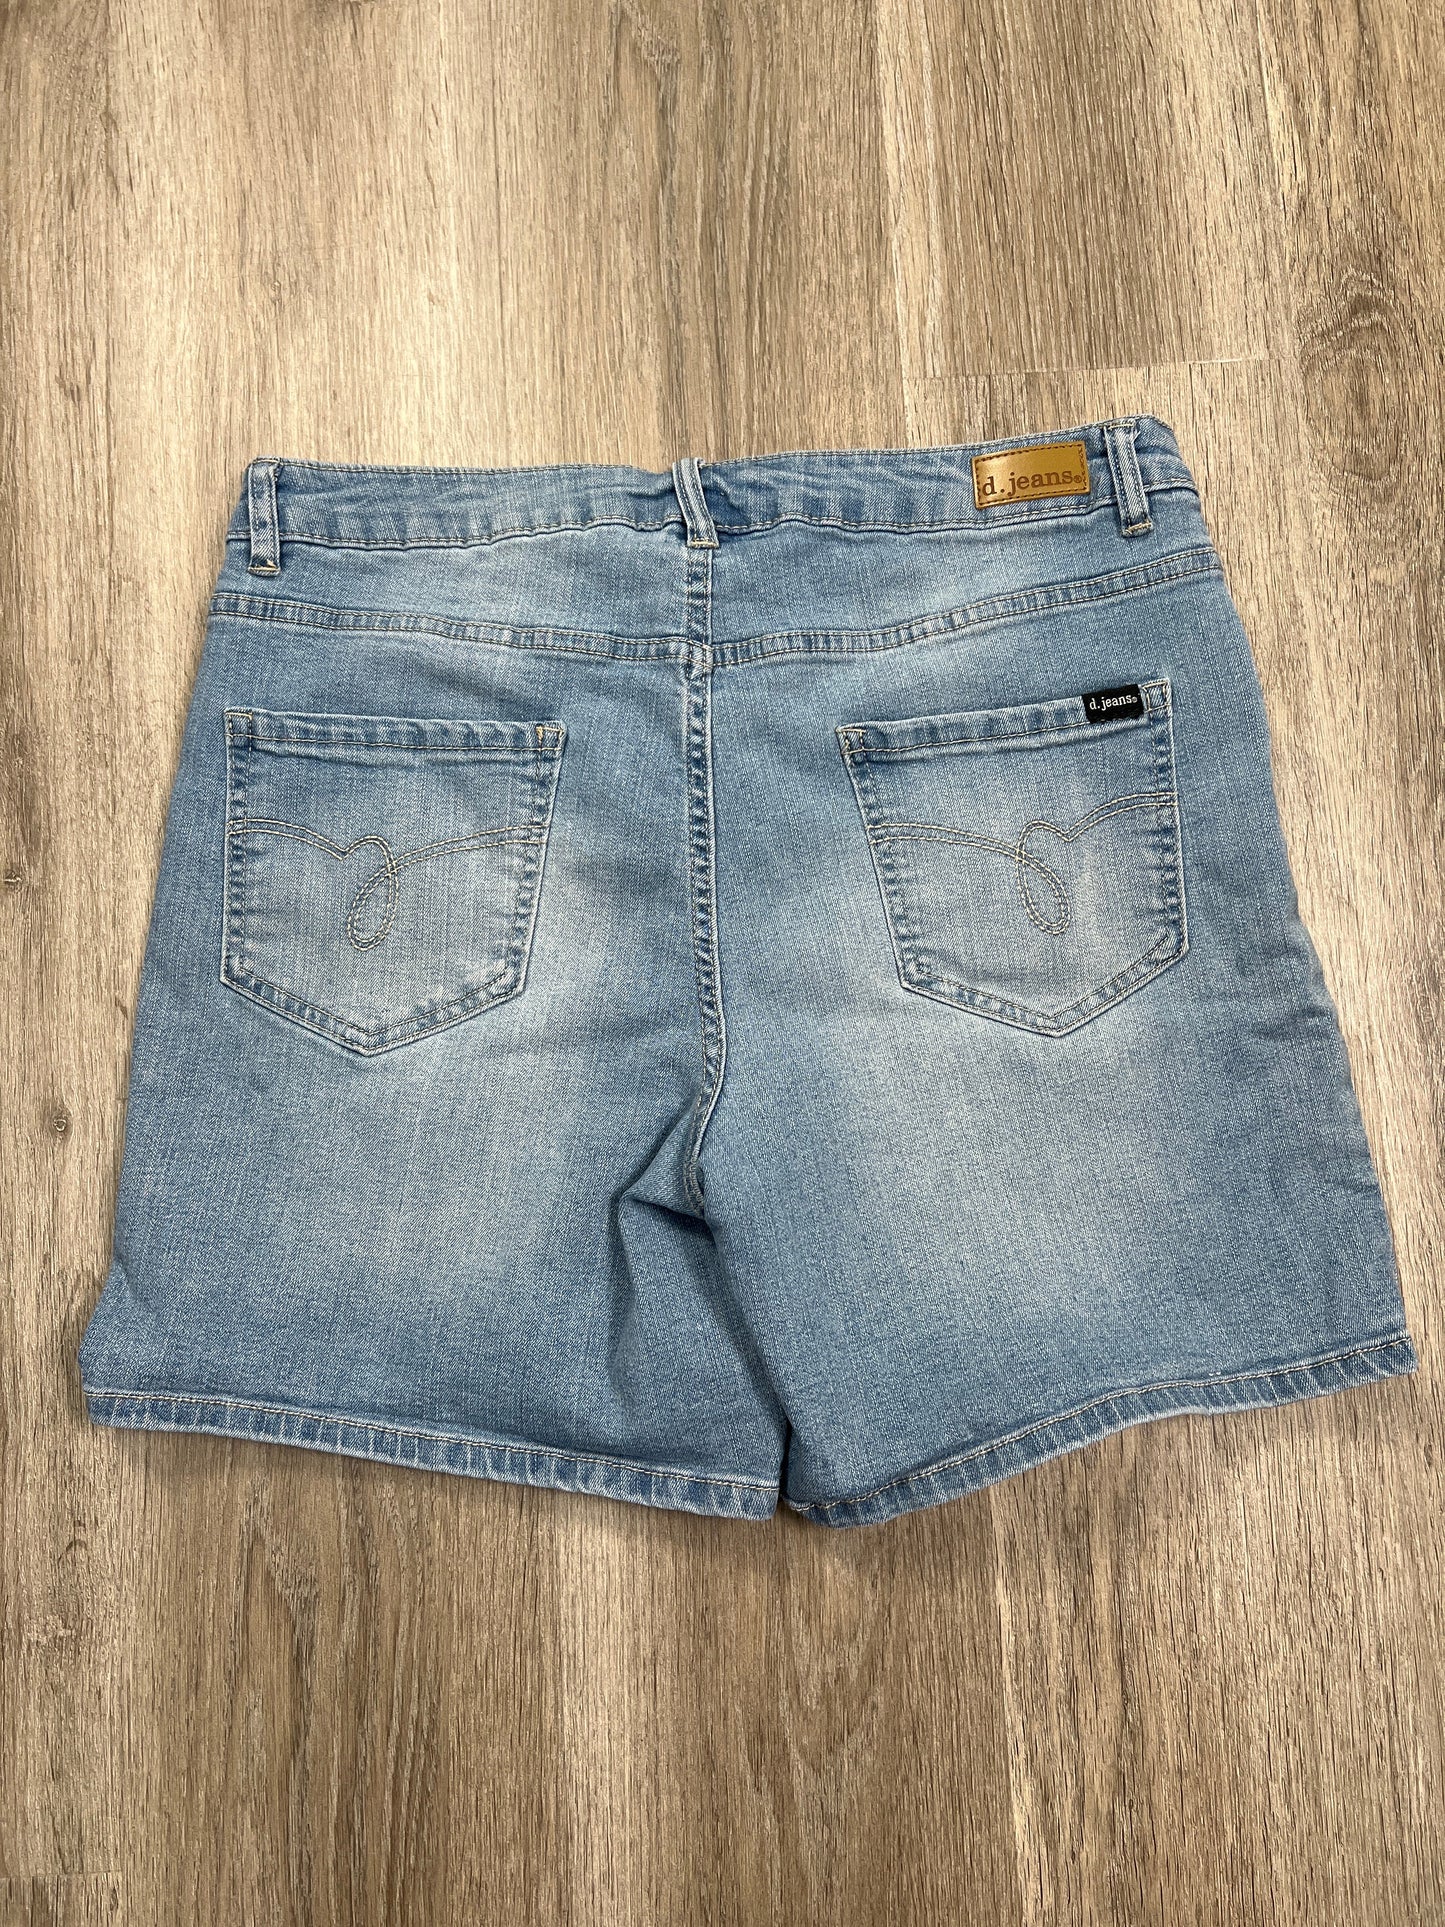 Shorts By D Jeans  Size: Xl